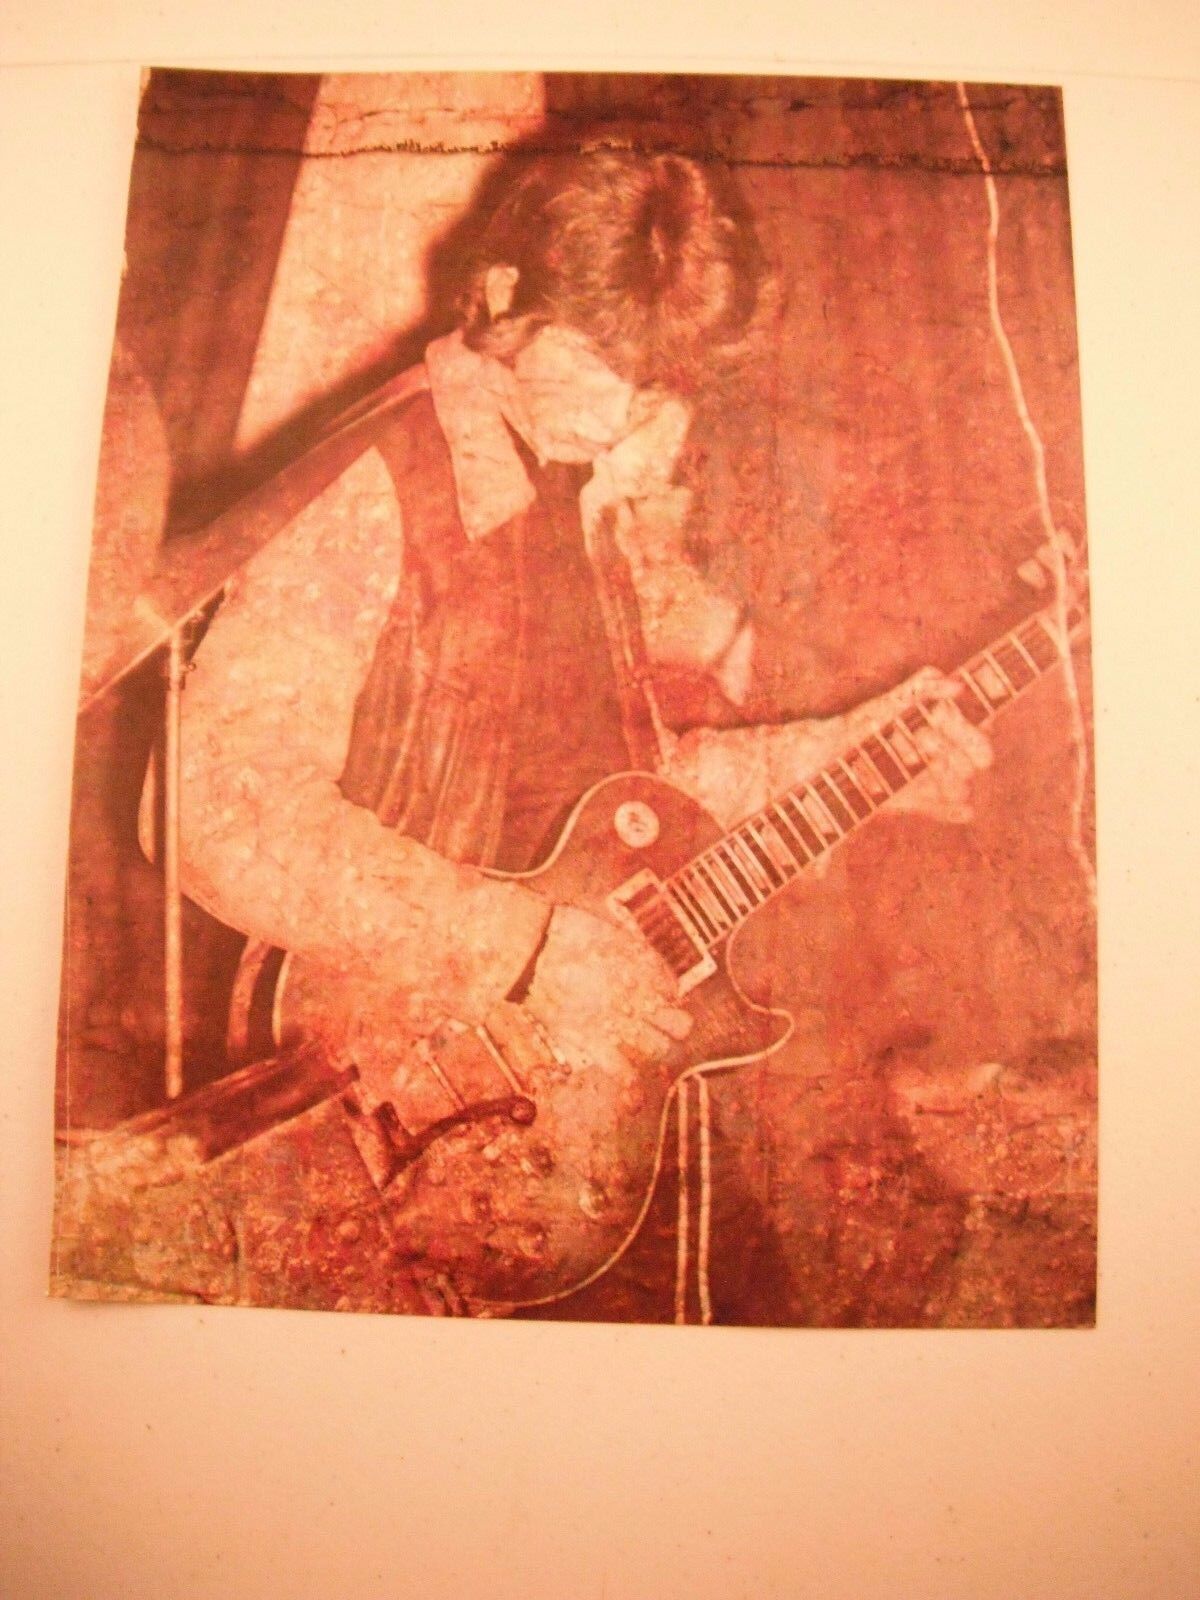 Mick Taylor Rolling Stones Guitarist 12x9 Coffee Table Book Photo Poster painting Page